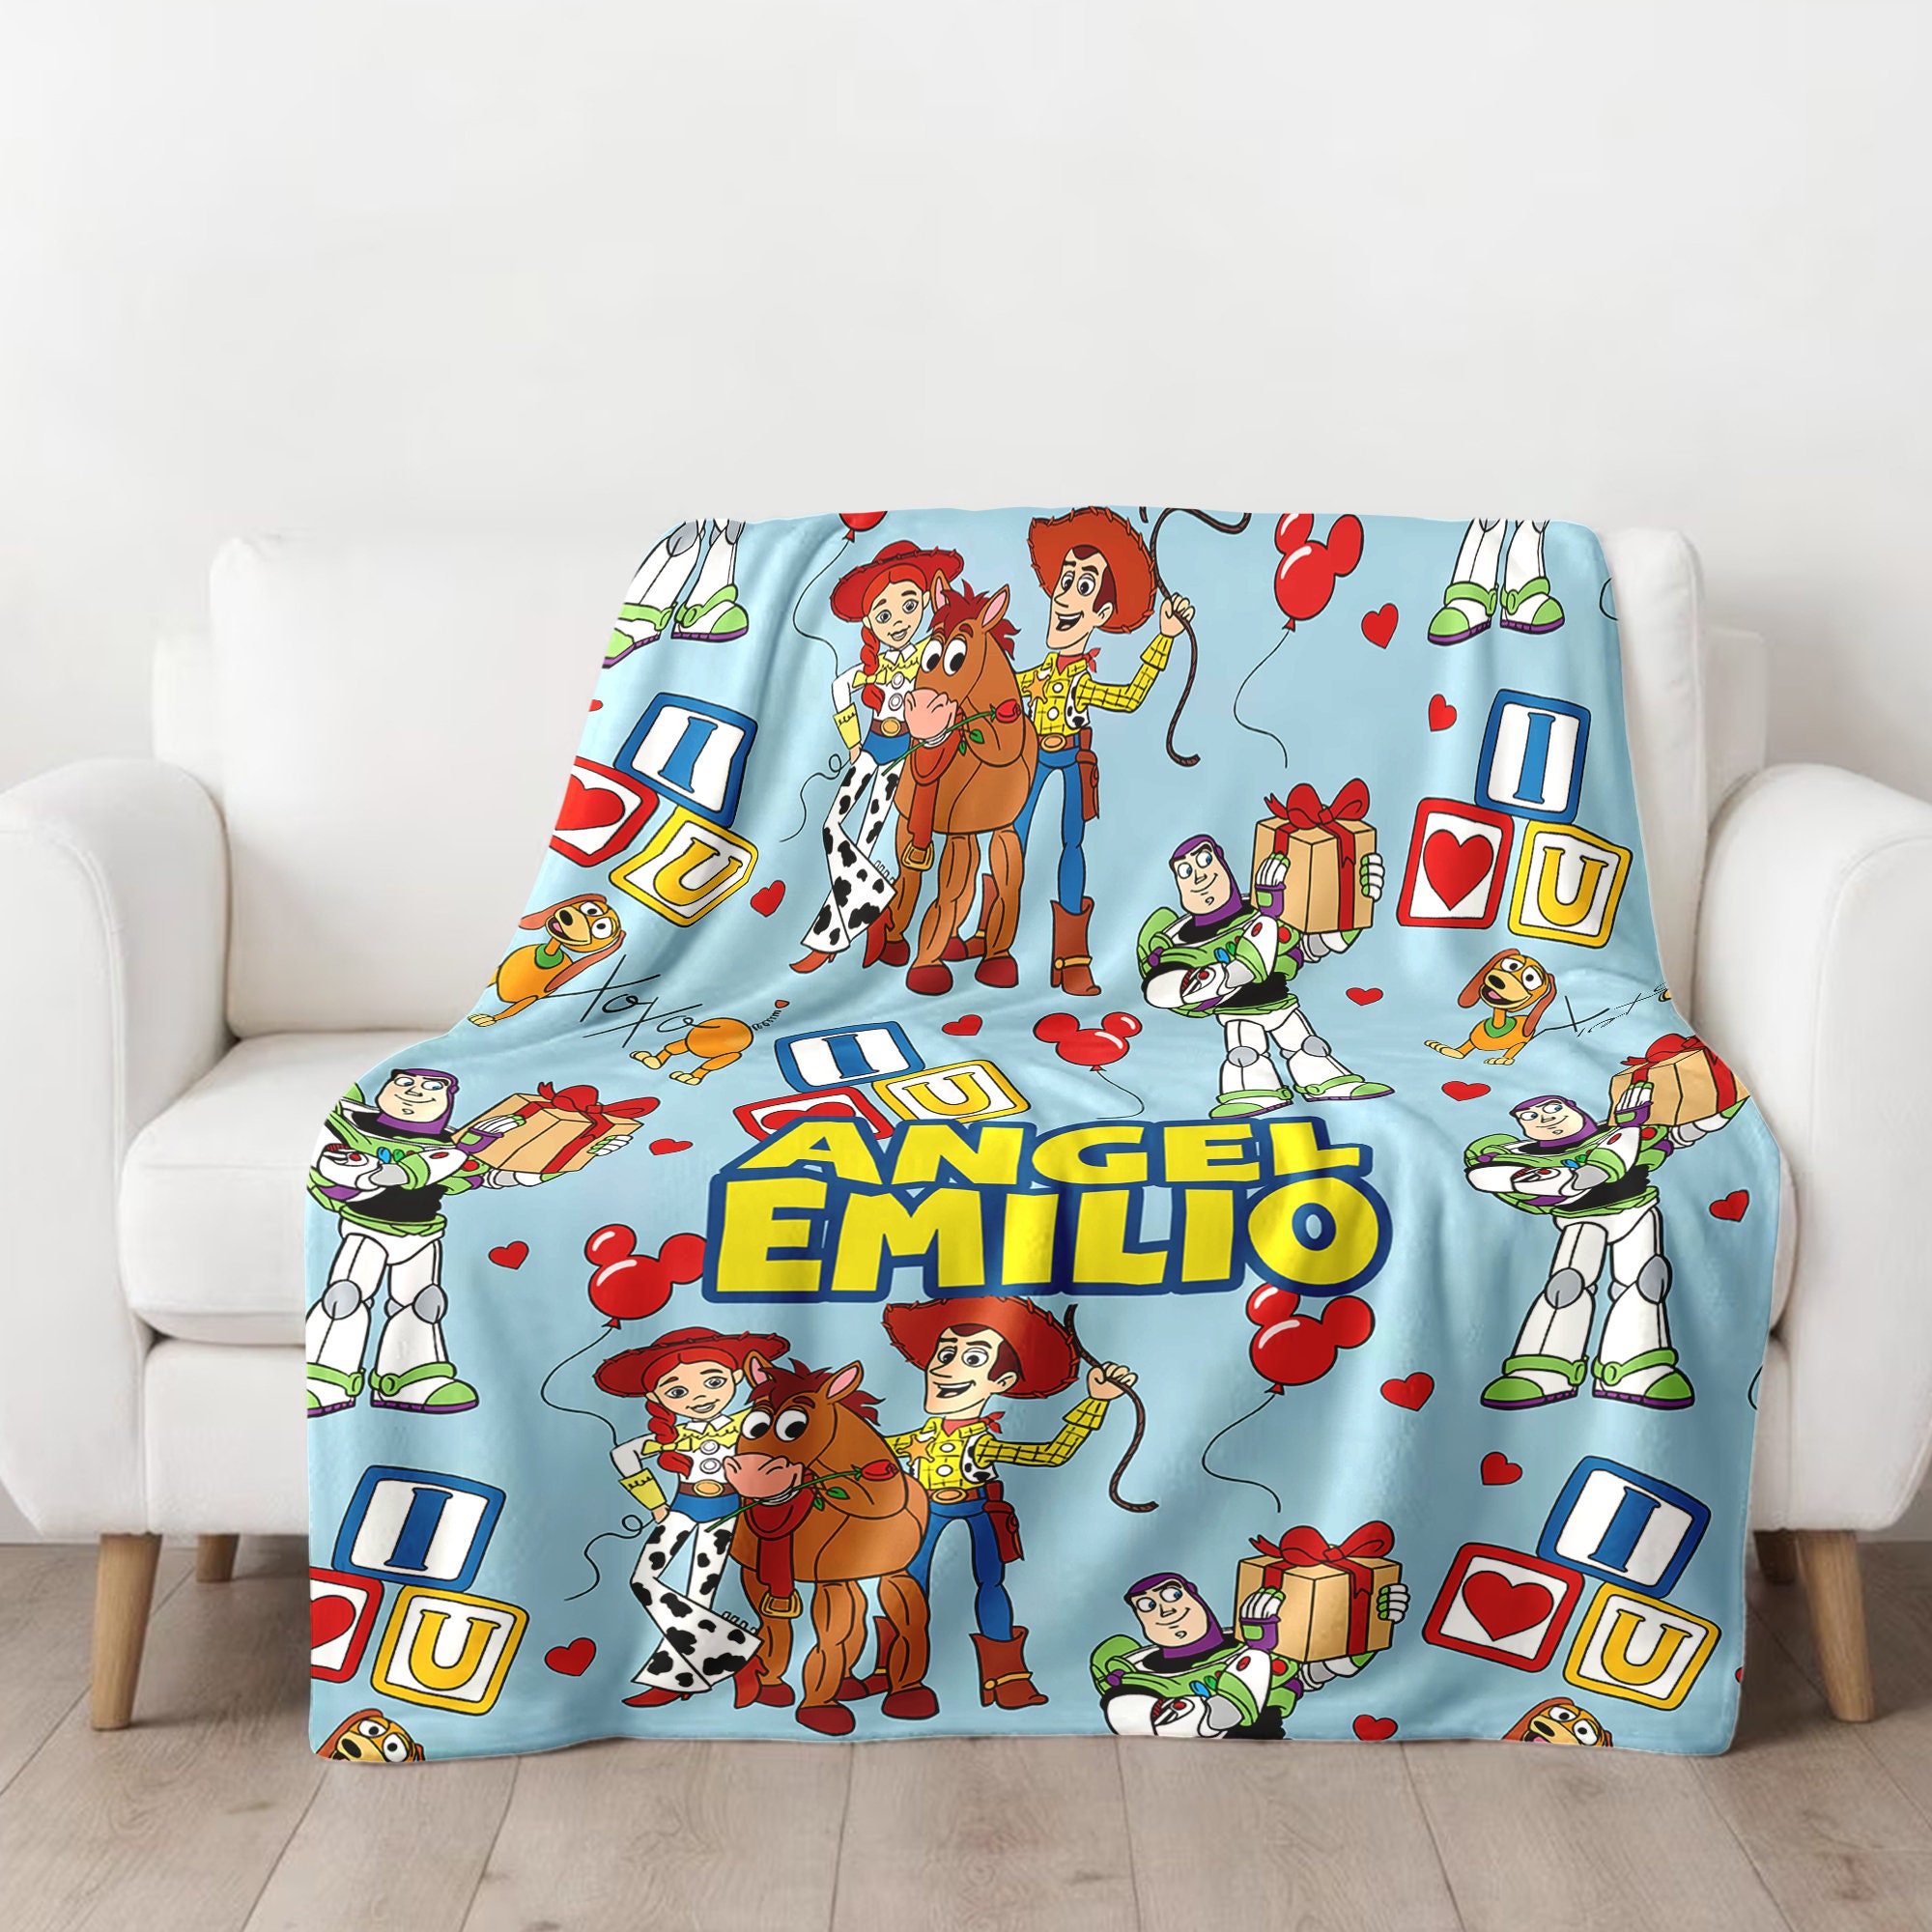 Personalized Toy Movie Blanket, Characters Blanket, Magic World Blanket Christmas Gift